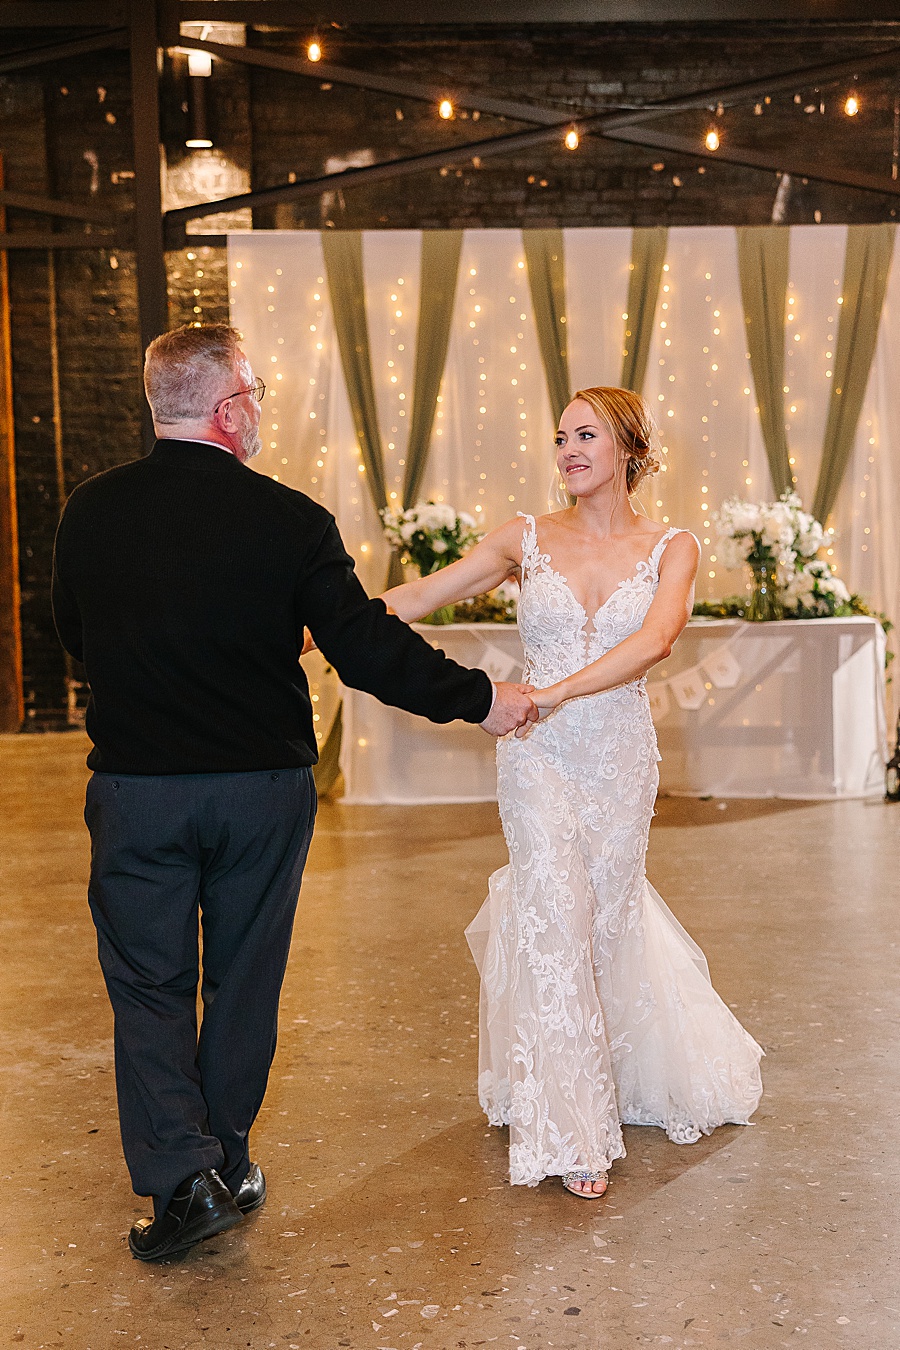 Bride & dad dancing at reception at Jackson Terminal events wedding in Knoxville TN by Mandy Hart Photo, Knoxville TN Wedding Photographer